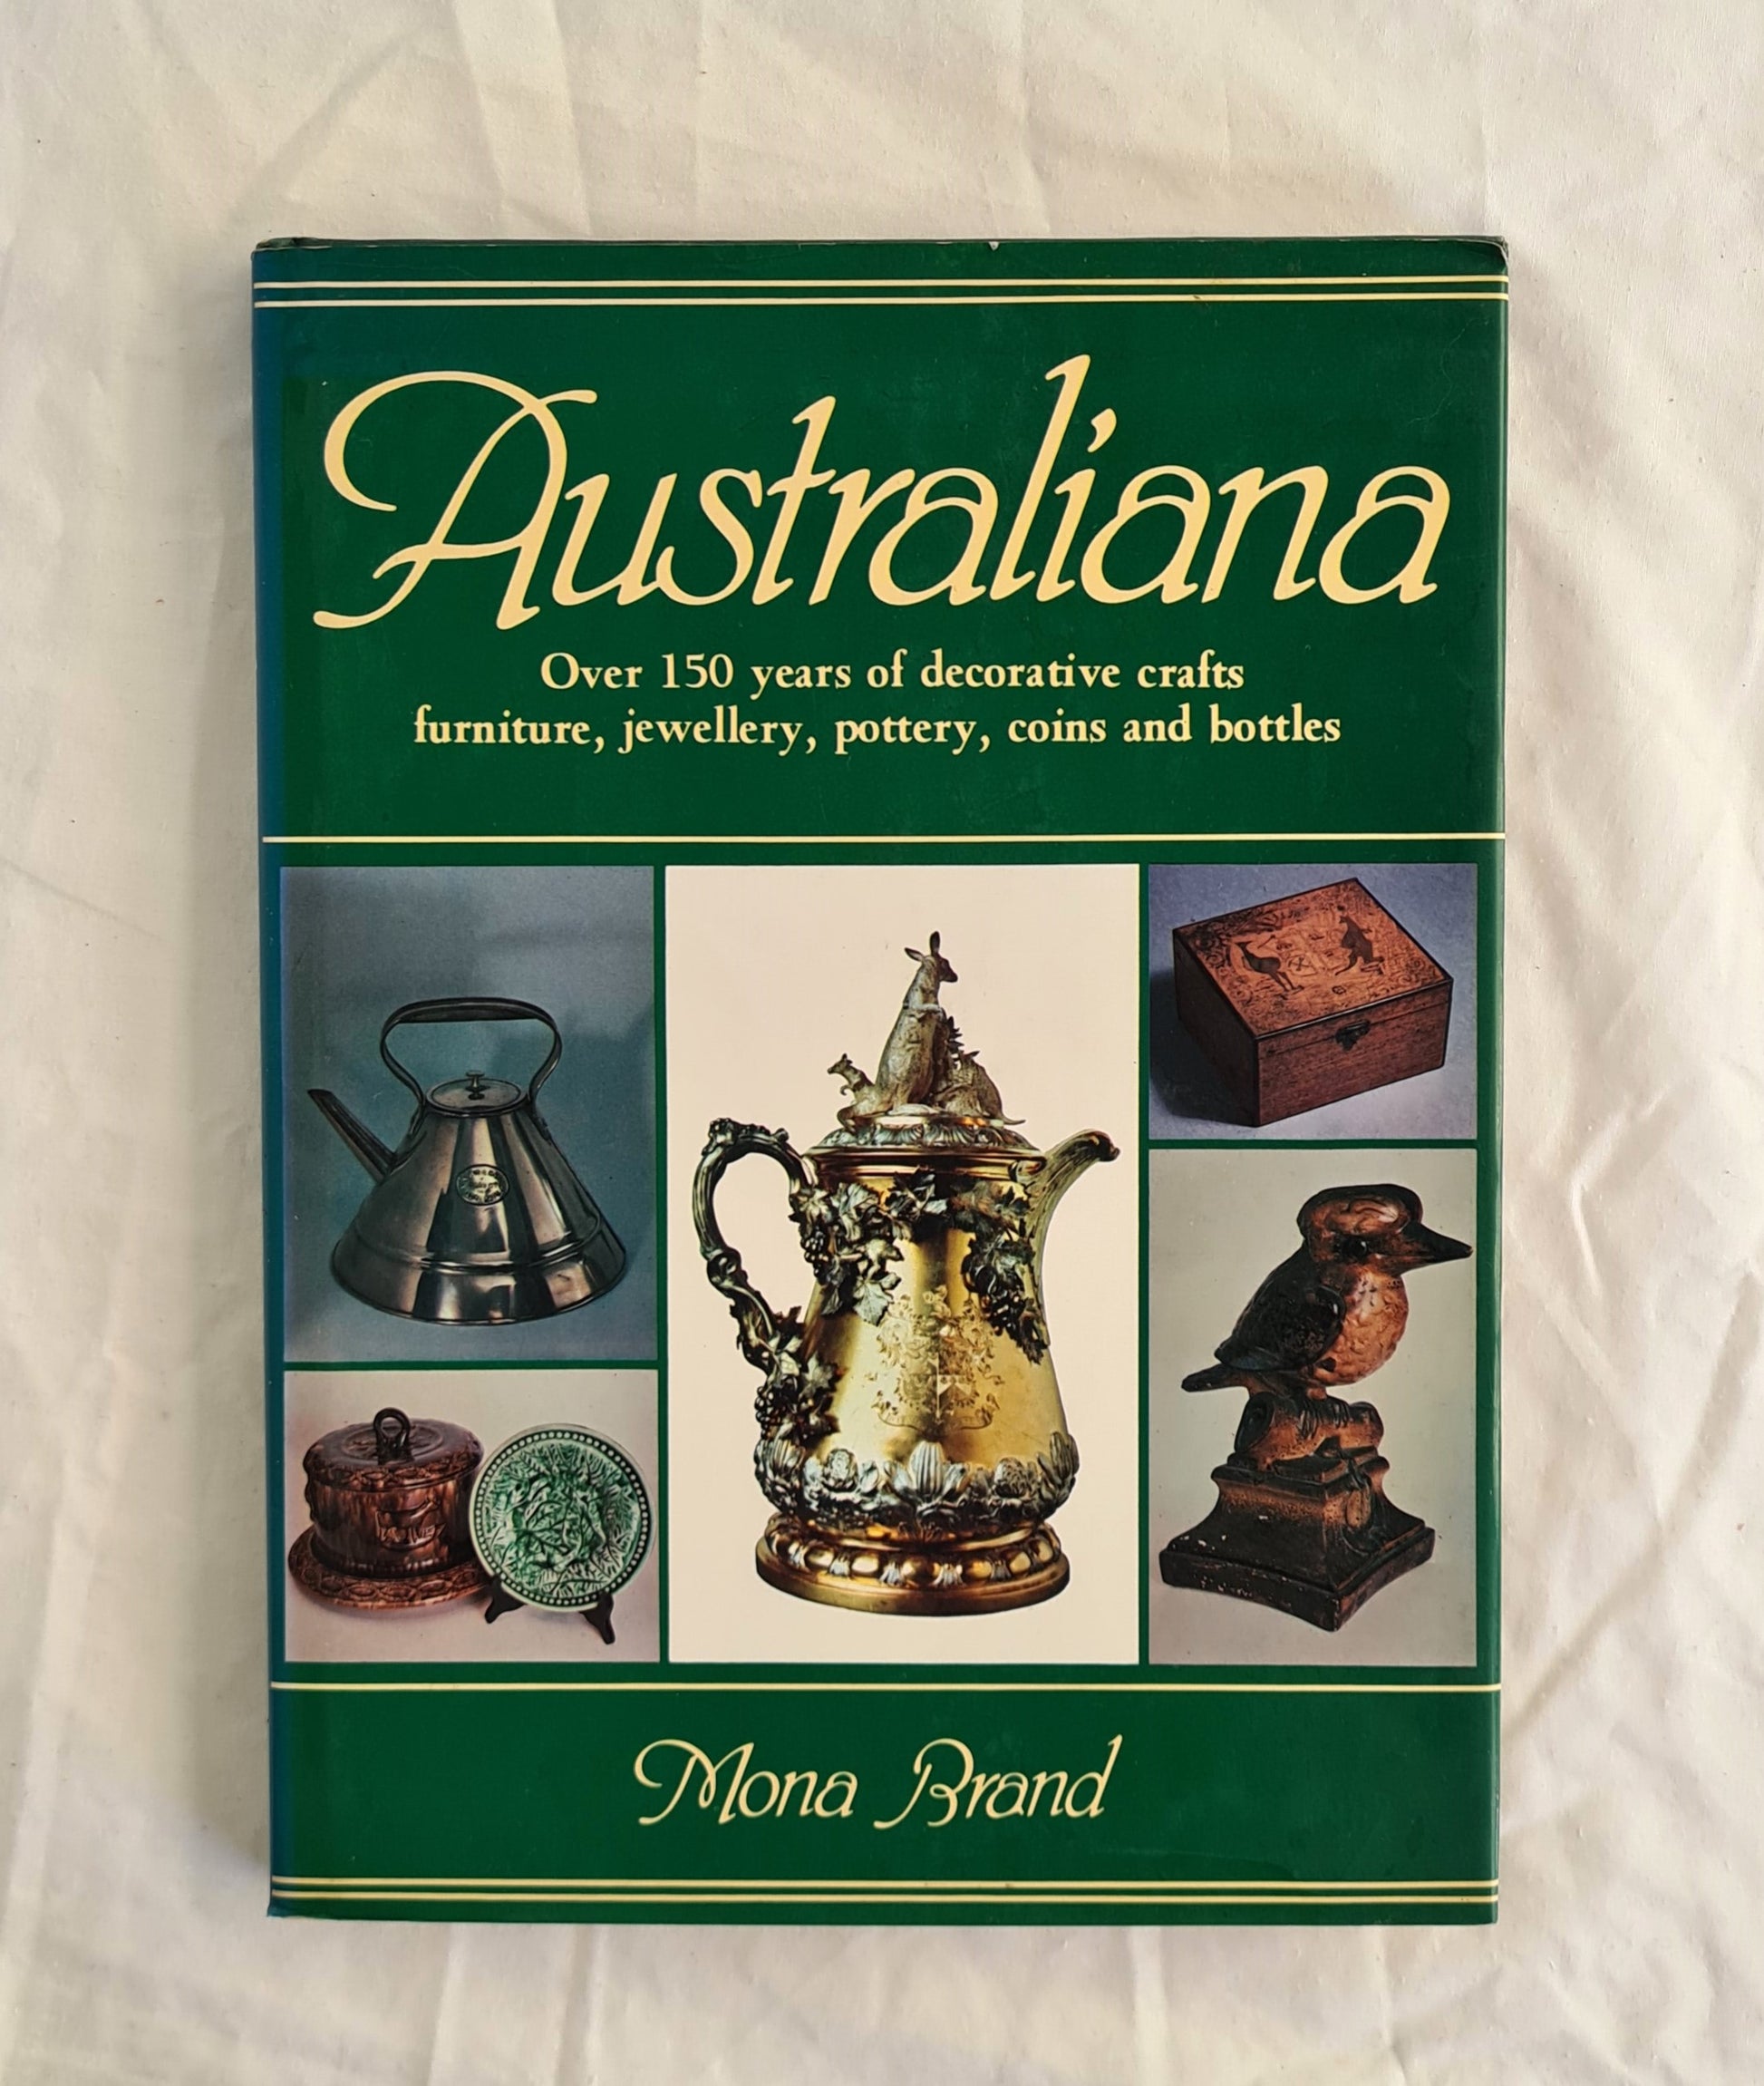 ﻿ Australiana  Over 150 years of decorative crafts furniture, jewellery, pottery, coins and bottles  by Mona Brand  photography by Russell Cockayne